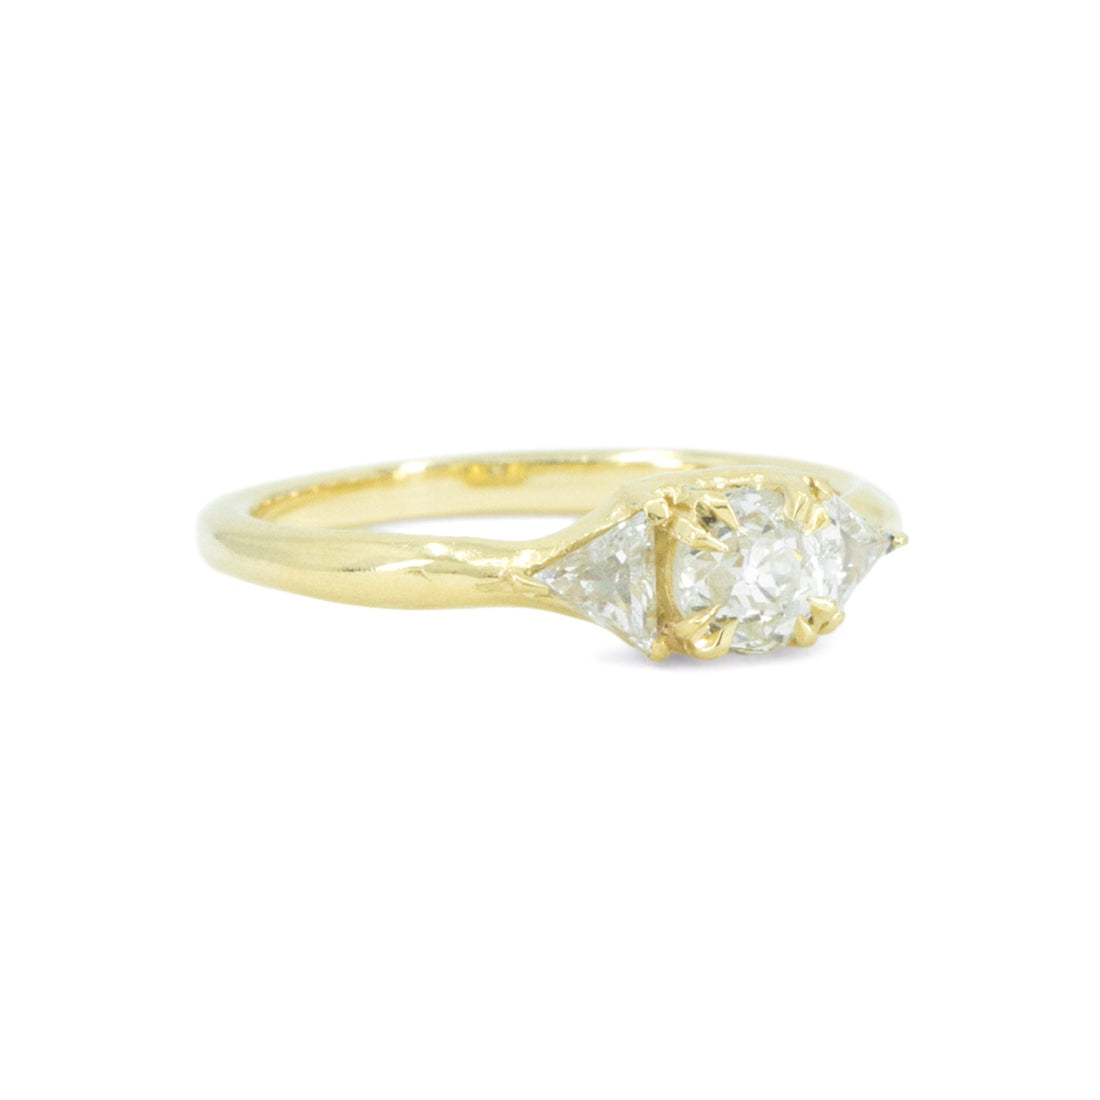 Perennial 3 Stone ring with antique diamonds in 18k yellow gold by Erin Cuff Jewelry.